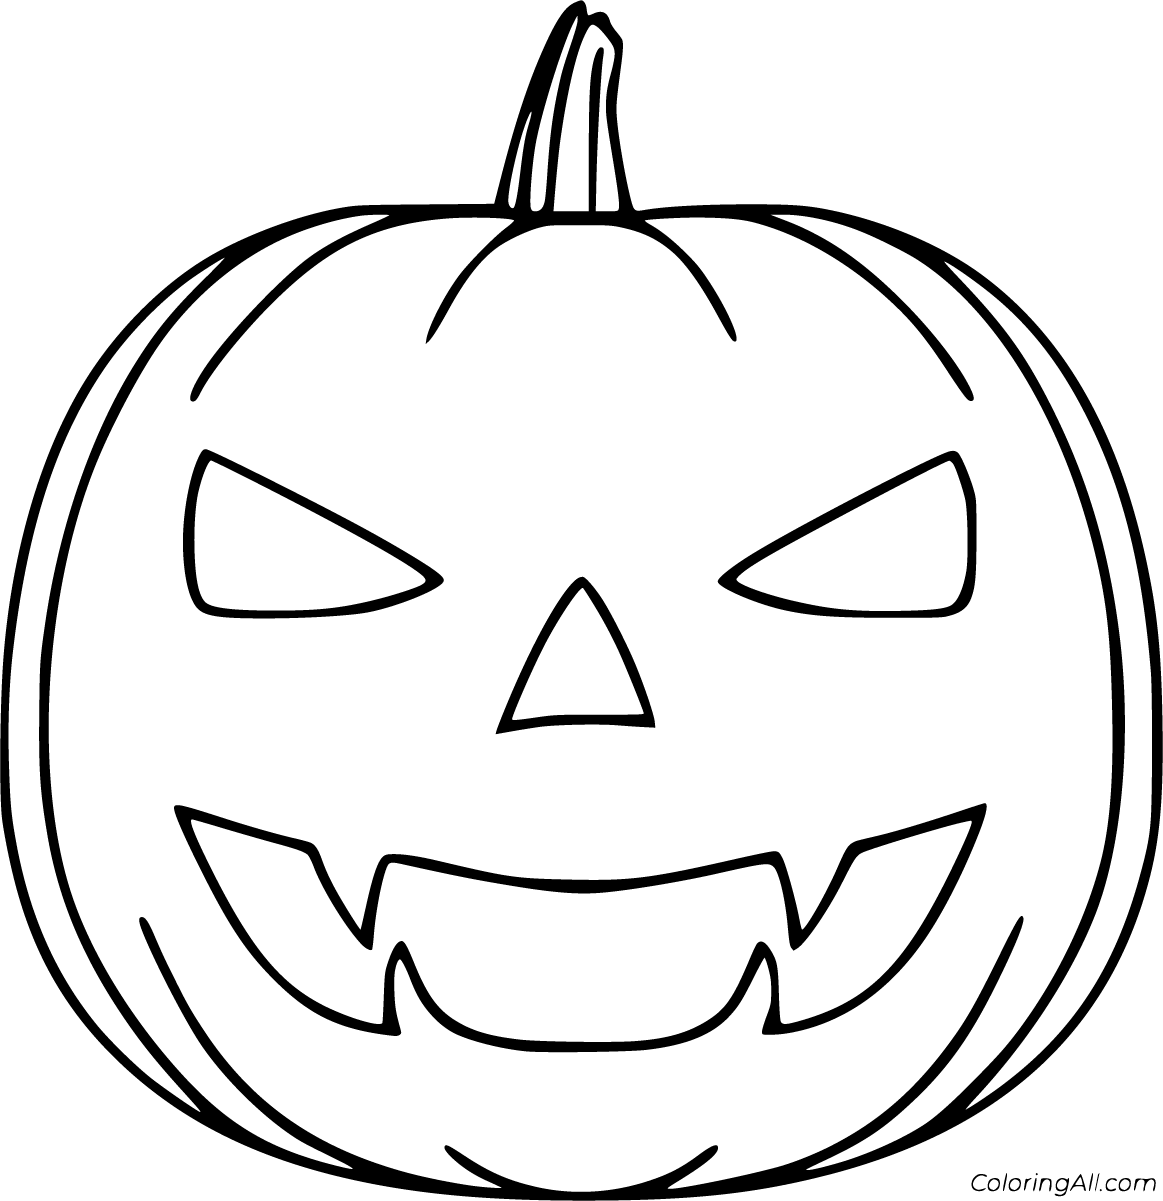 Jack O Lantern Coloring Pages - ColoringAll